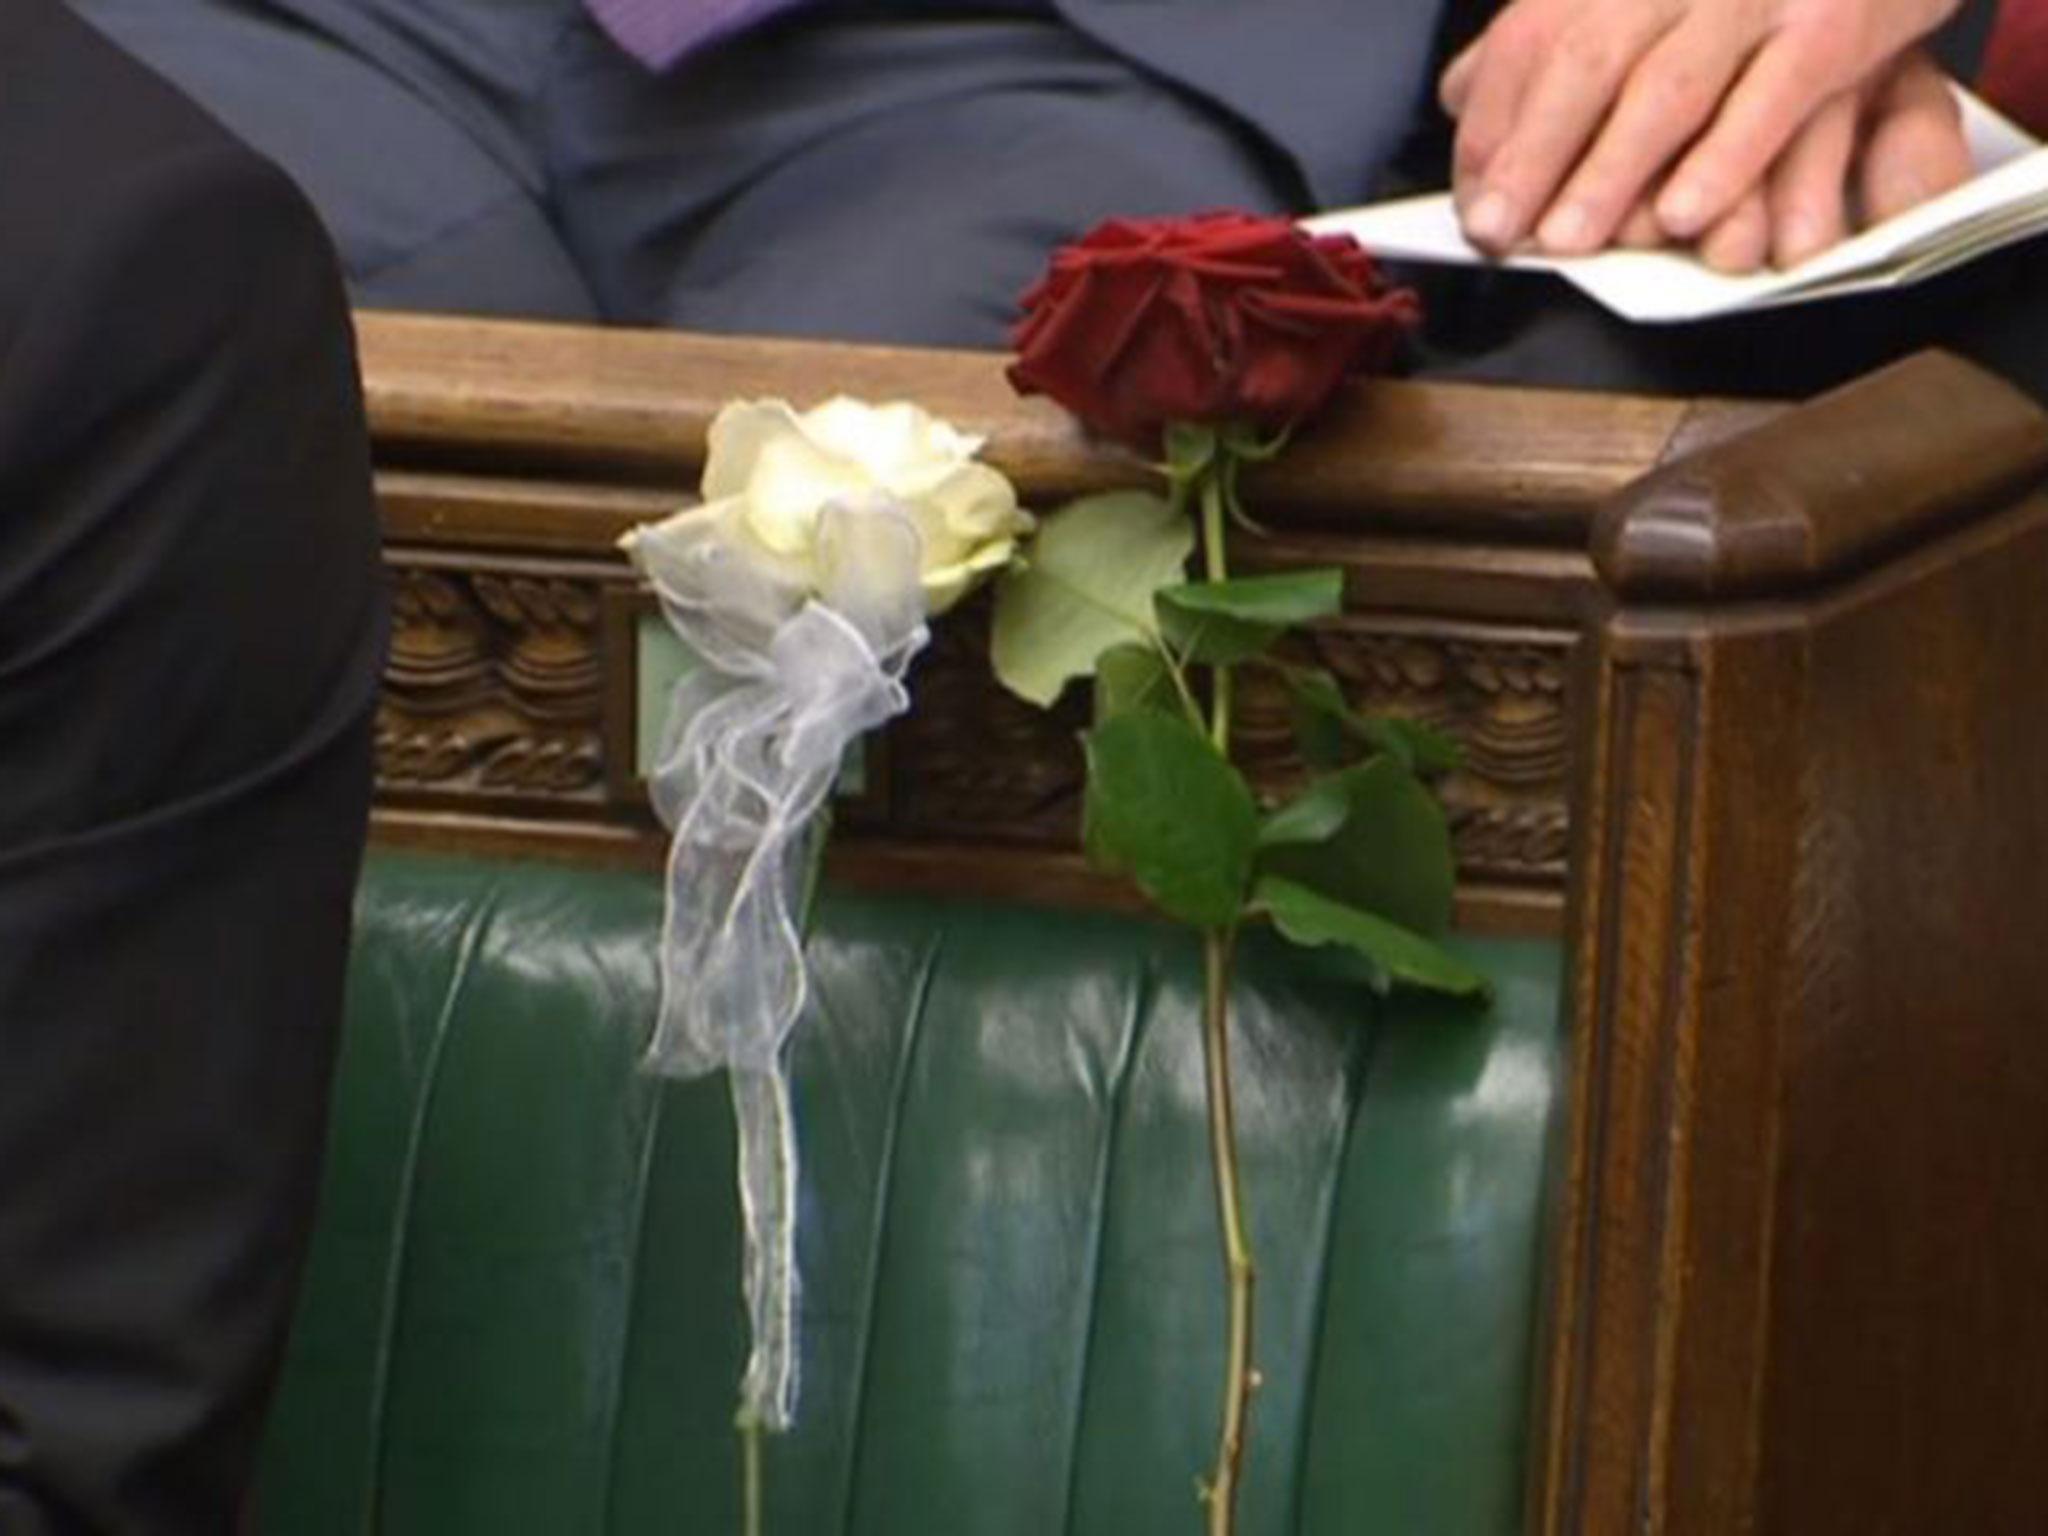 A white and red rose lie on Jo Cox's empty seat in the House of Commons, as MPs gather to pay tribute to her